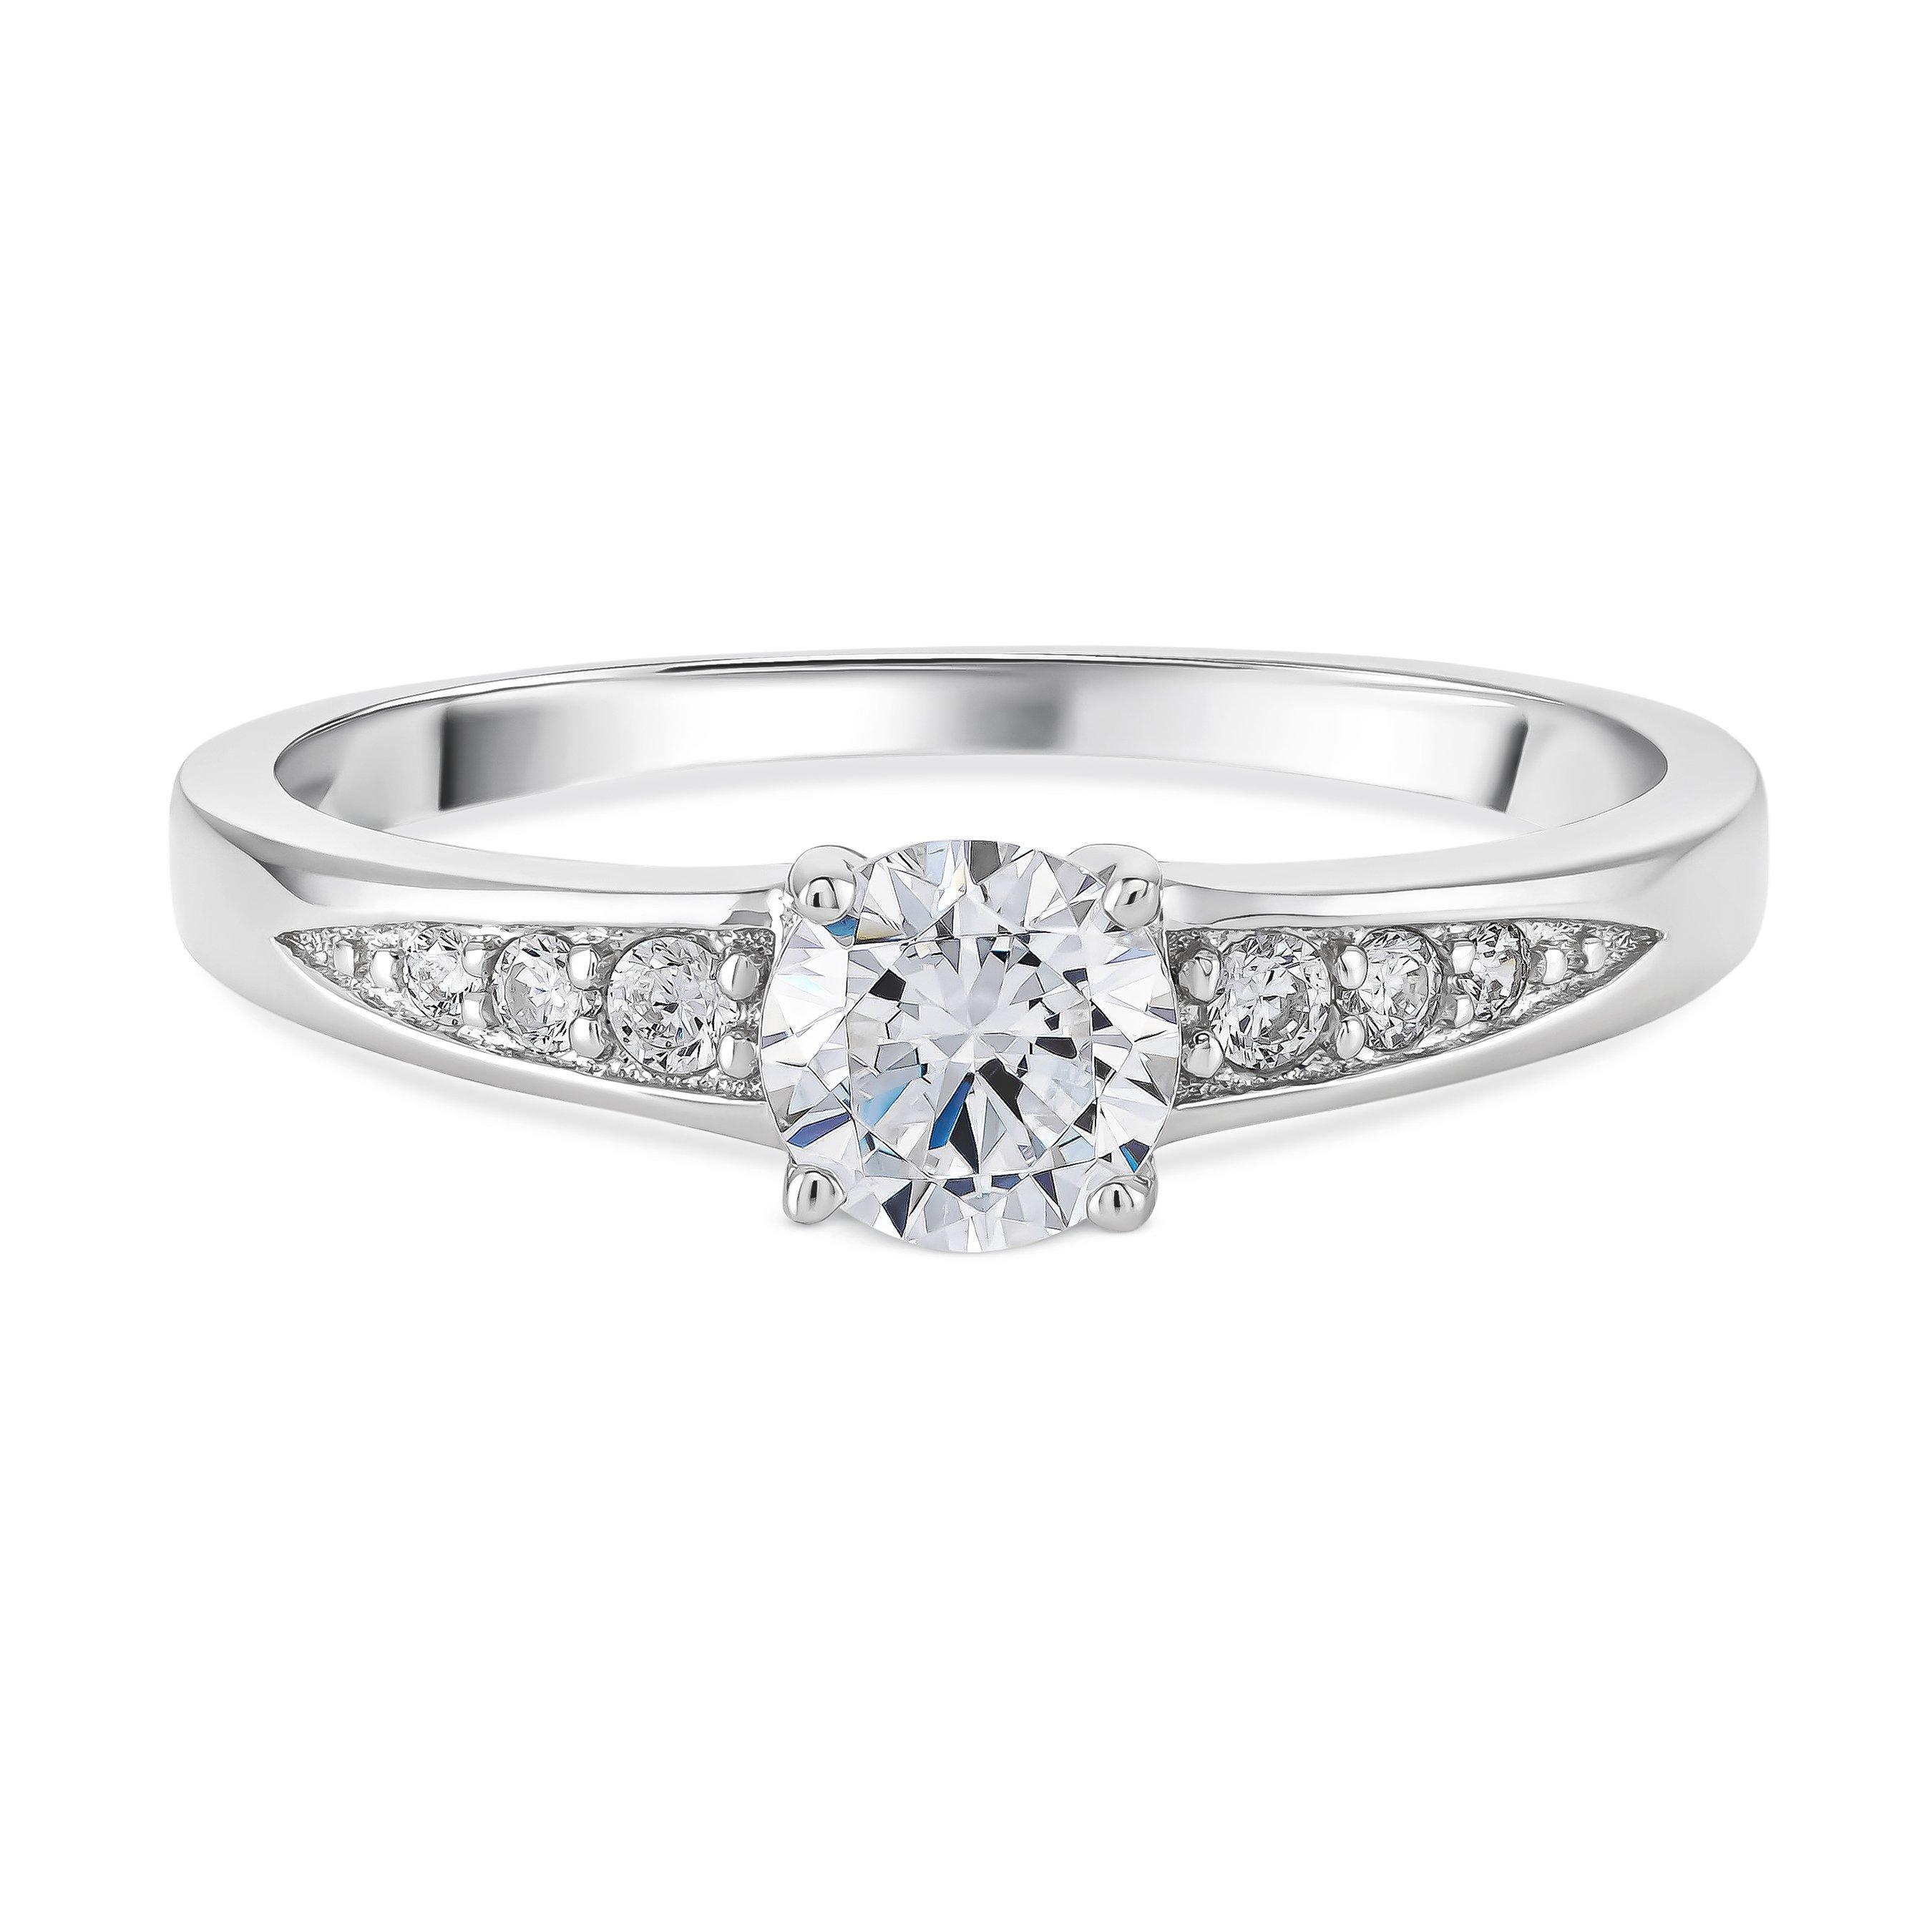 9ct White Gold Cubic Zirconia Ring | 0005479 | Beaverbrooks the Jewellers